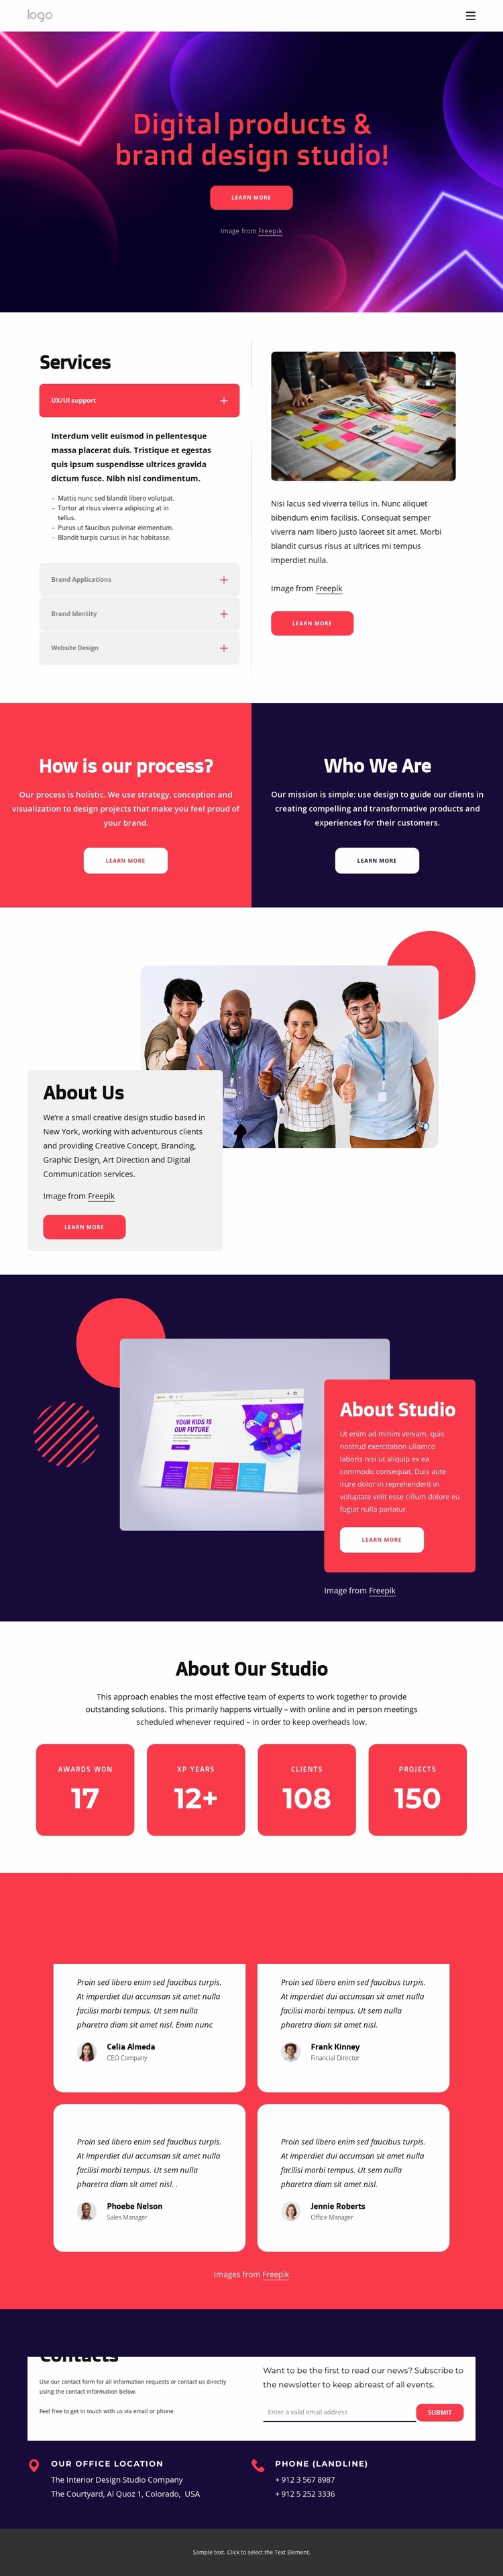 Digital products and brand design studio Landing Page